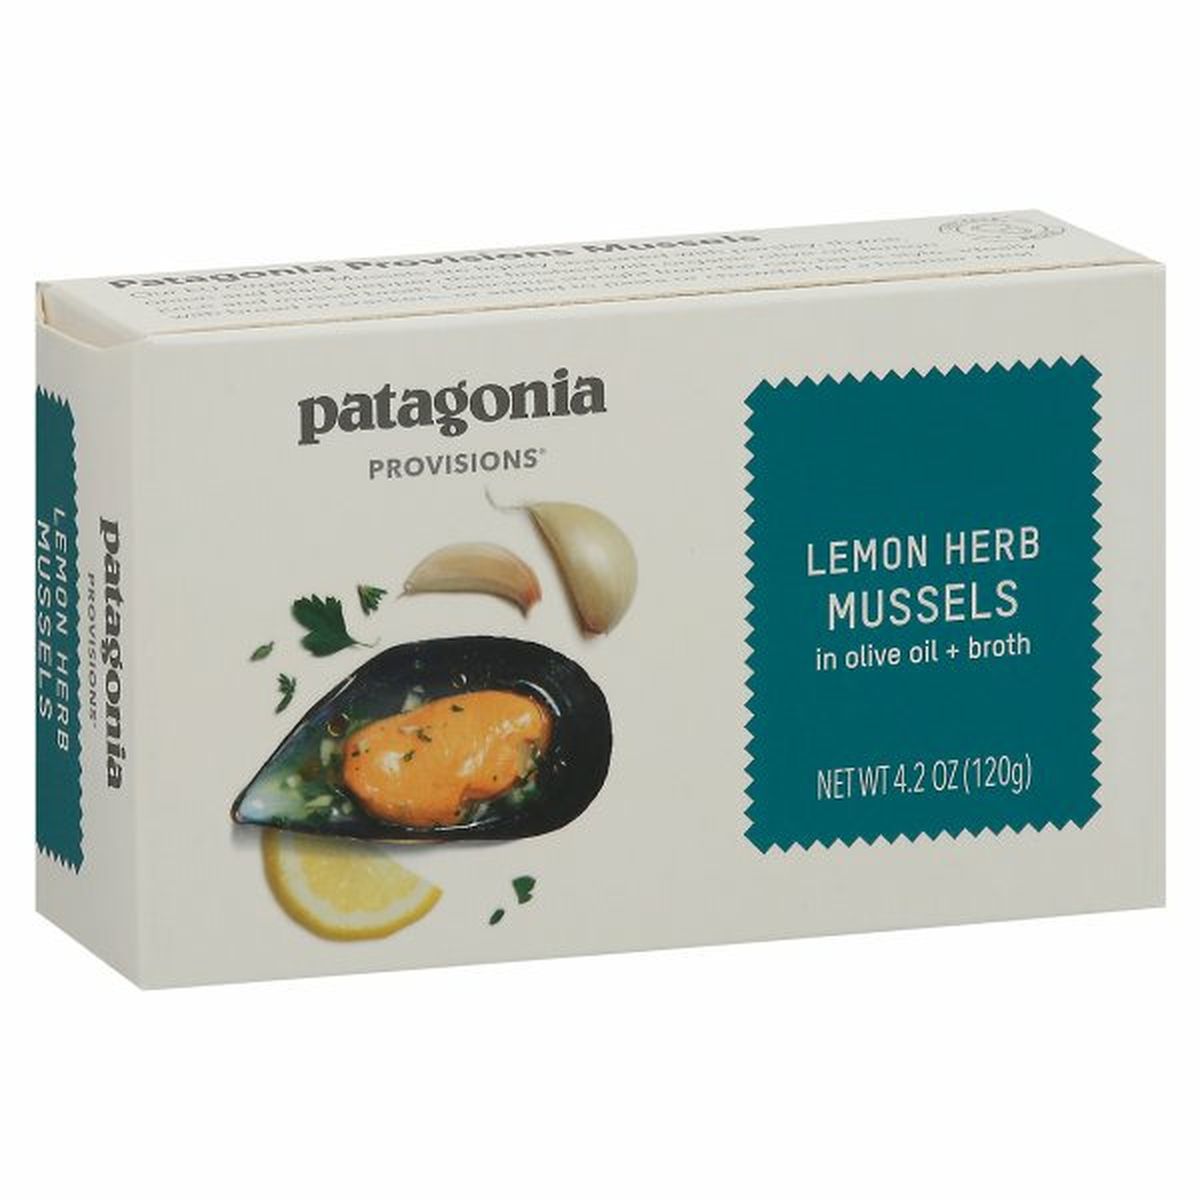 Calories in Patagonia Provisions Mussels, in Olive Oil + Broth, Lemon Herb